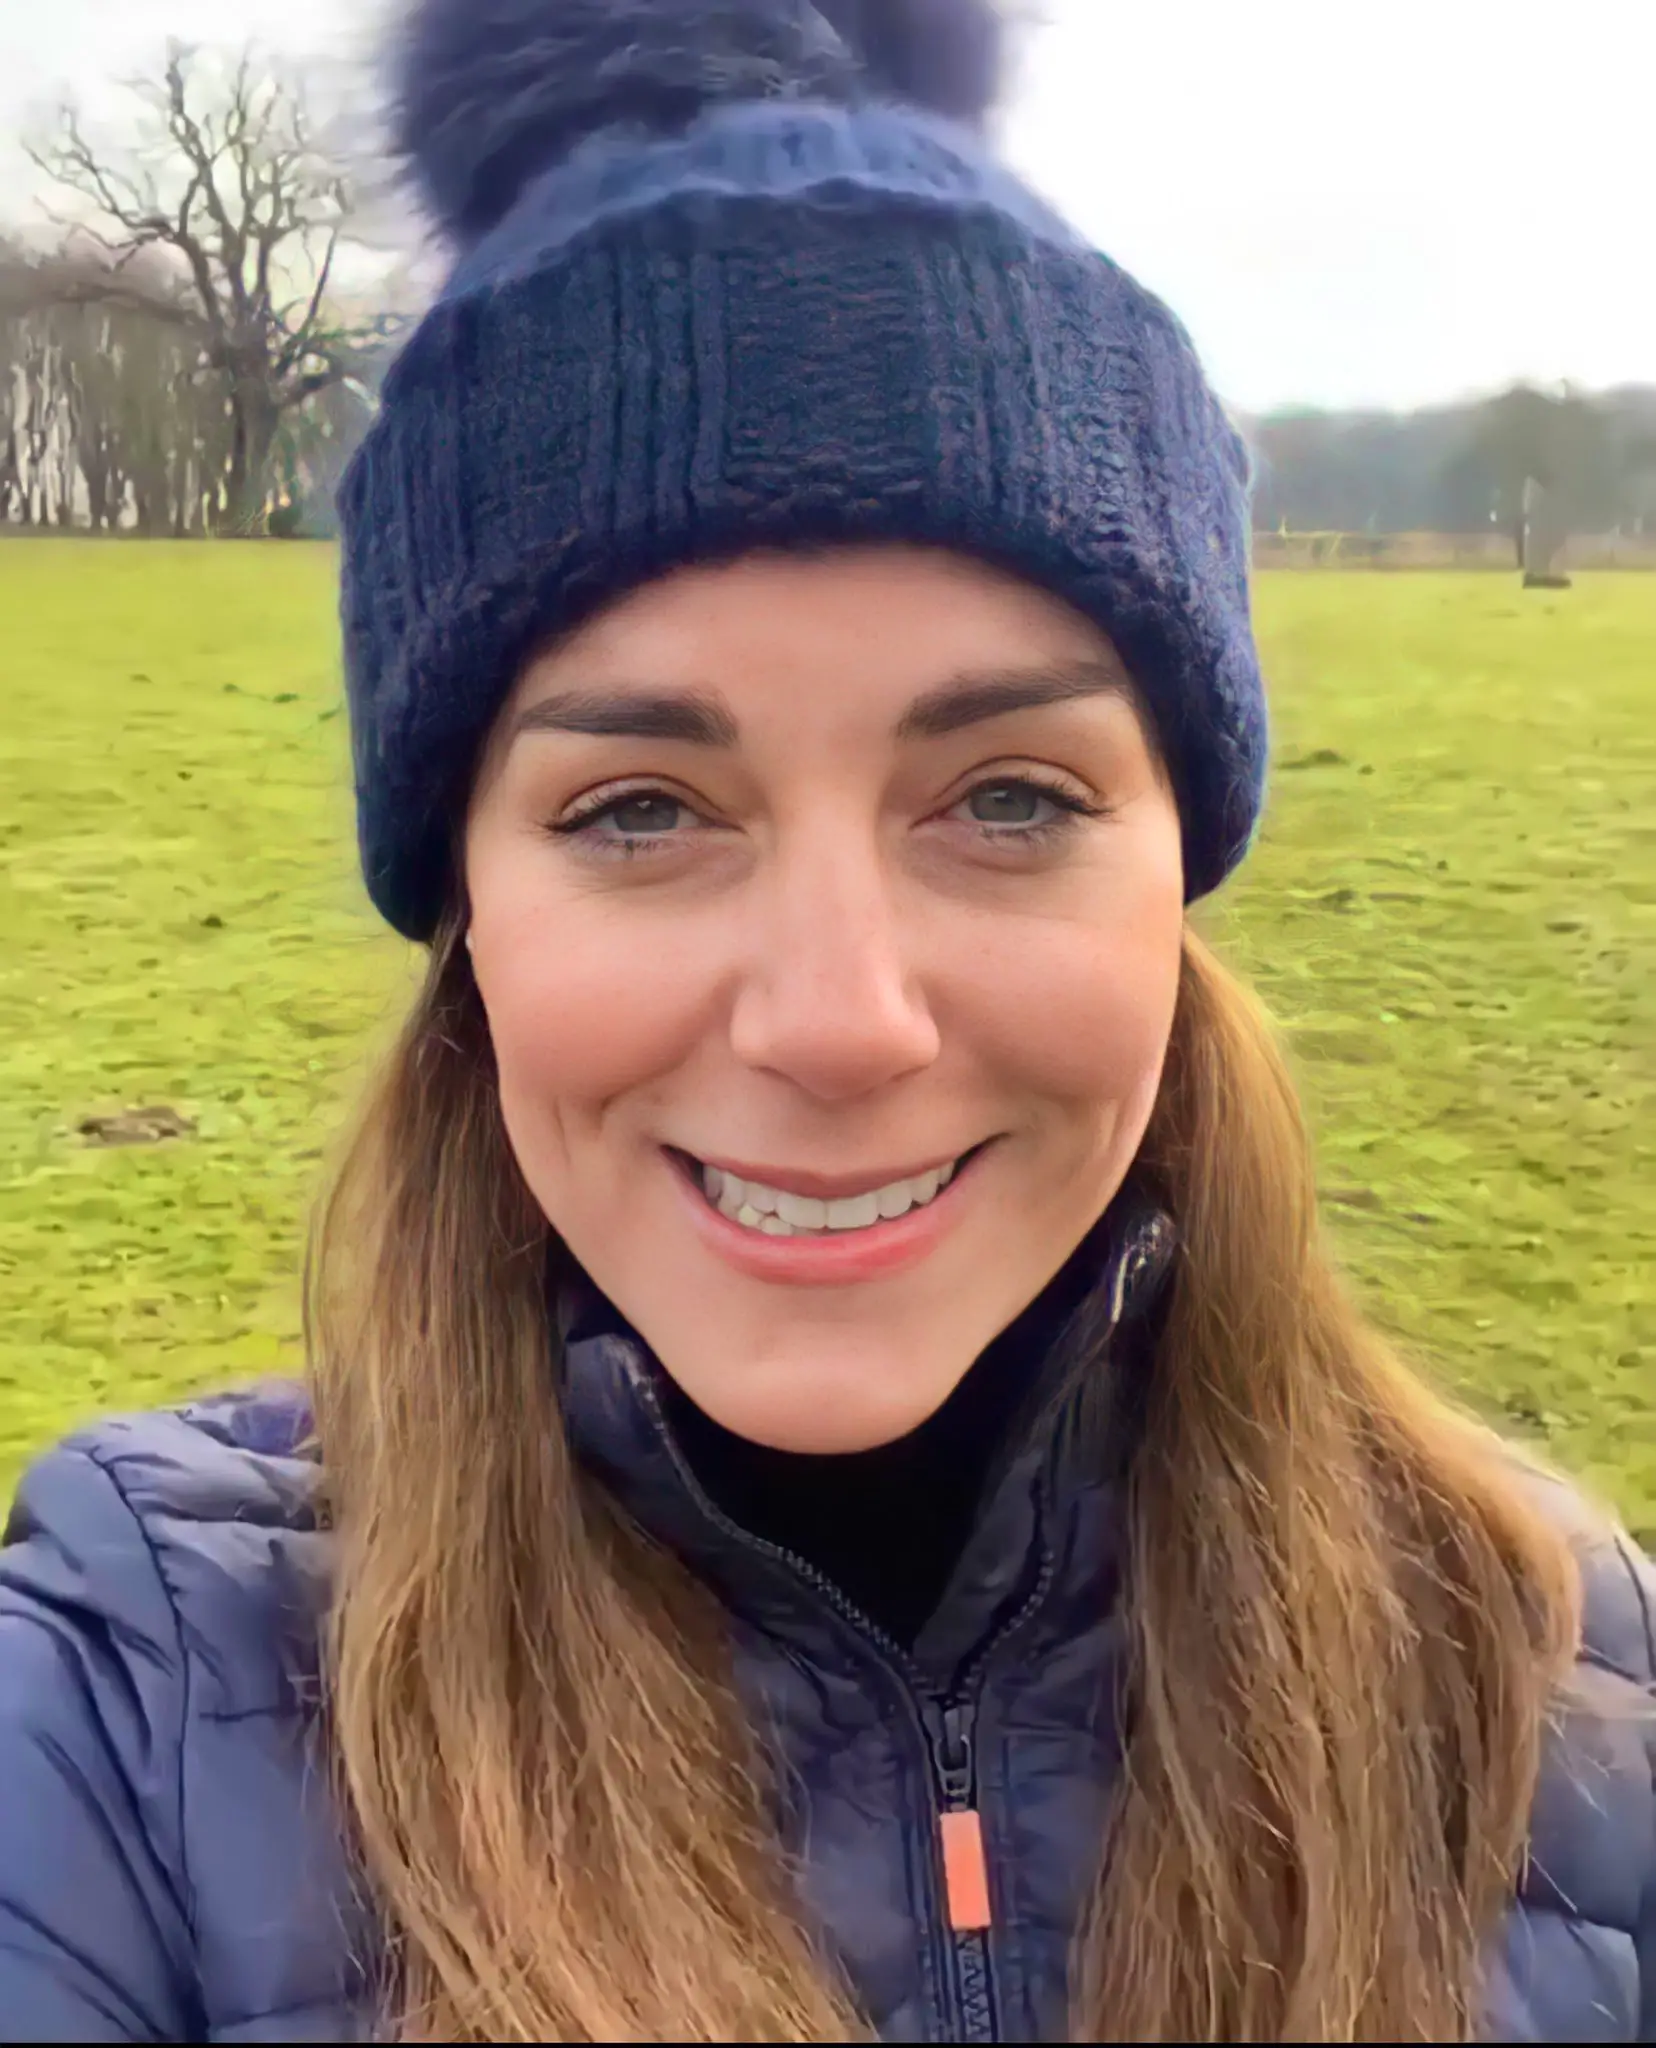 The Duchess of Cambridge recorded her first selfie video